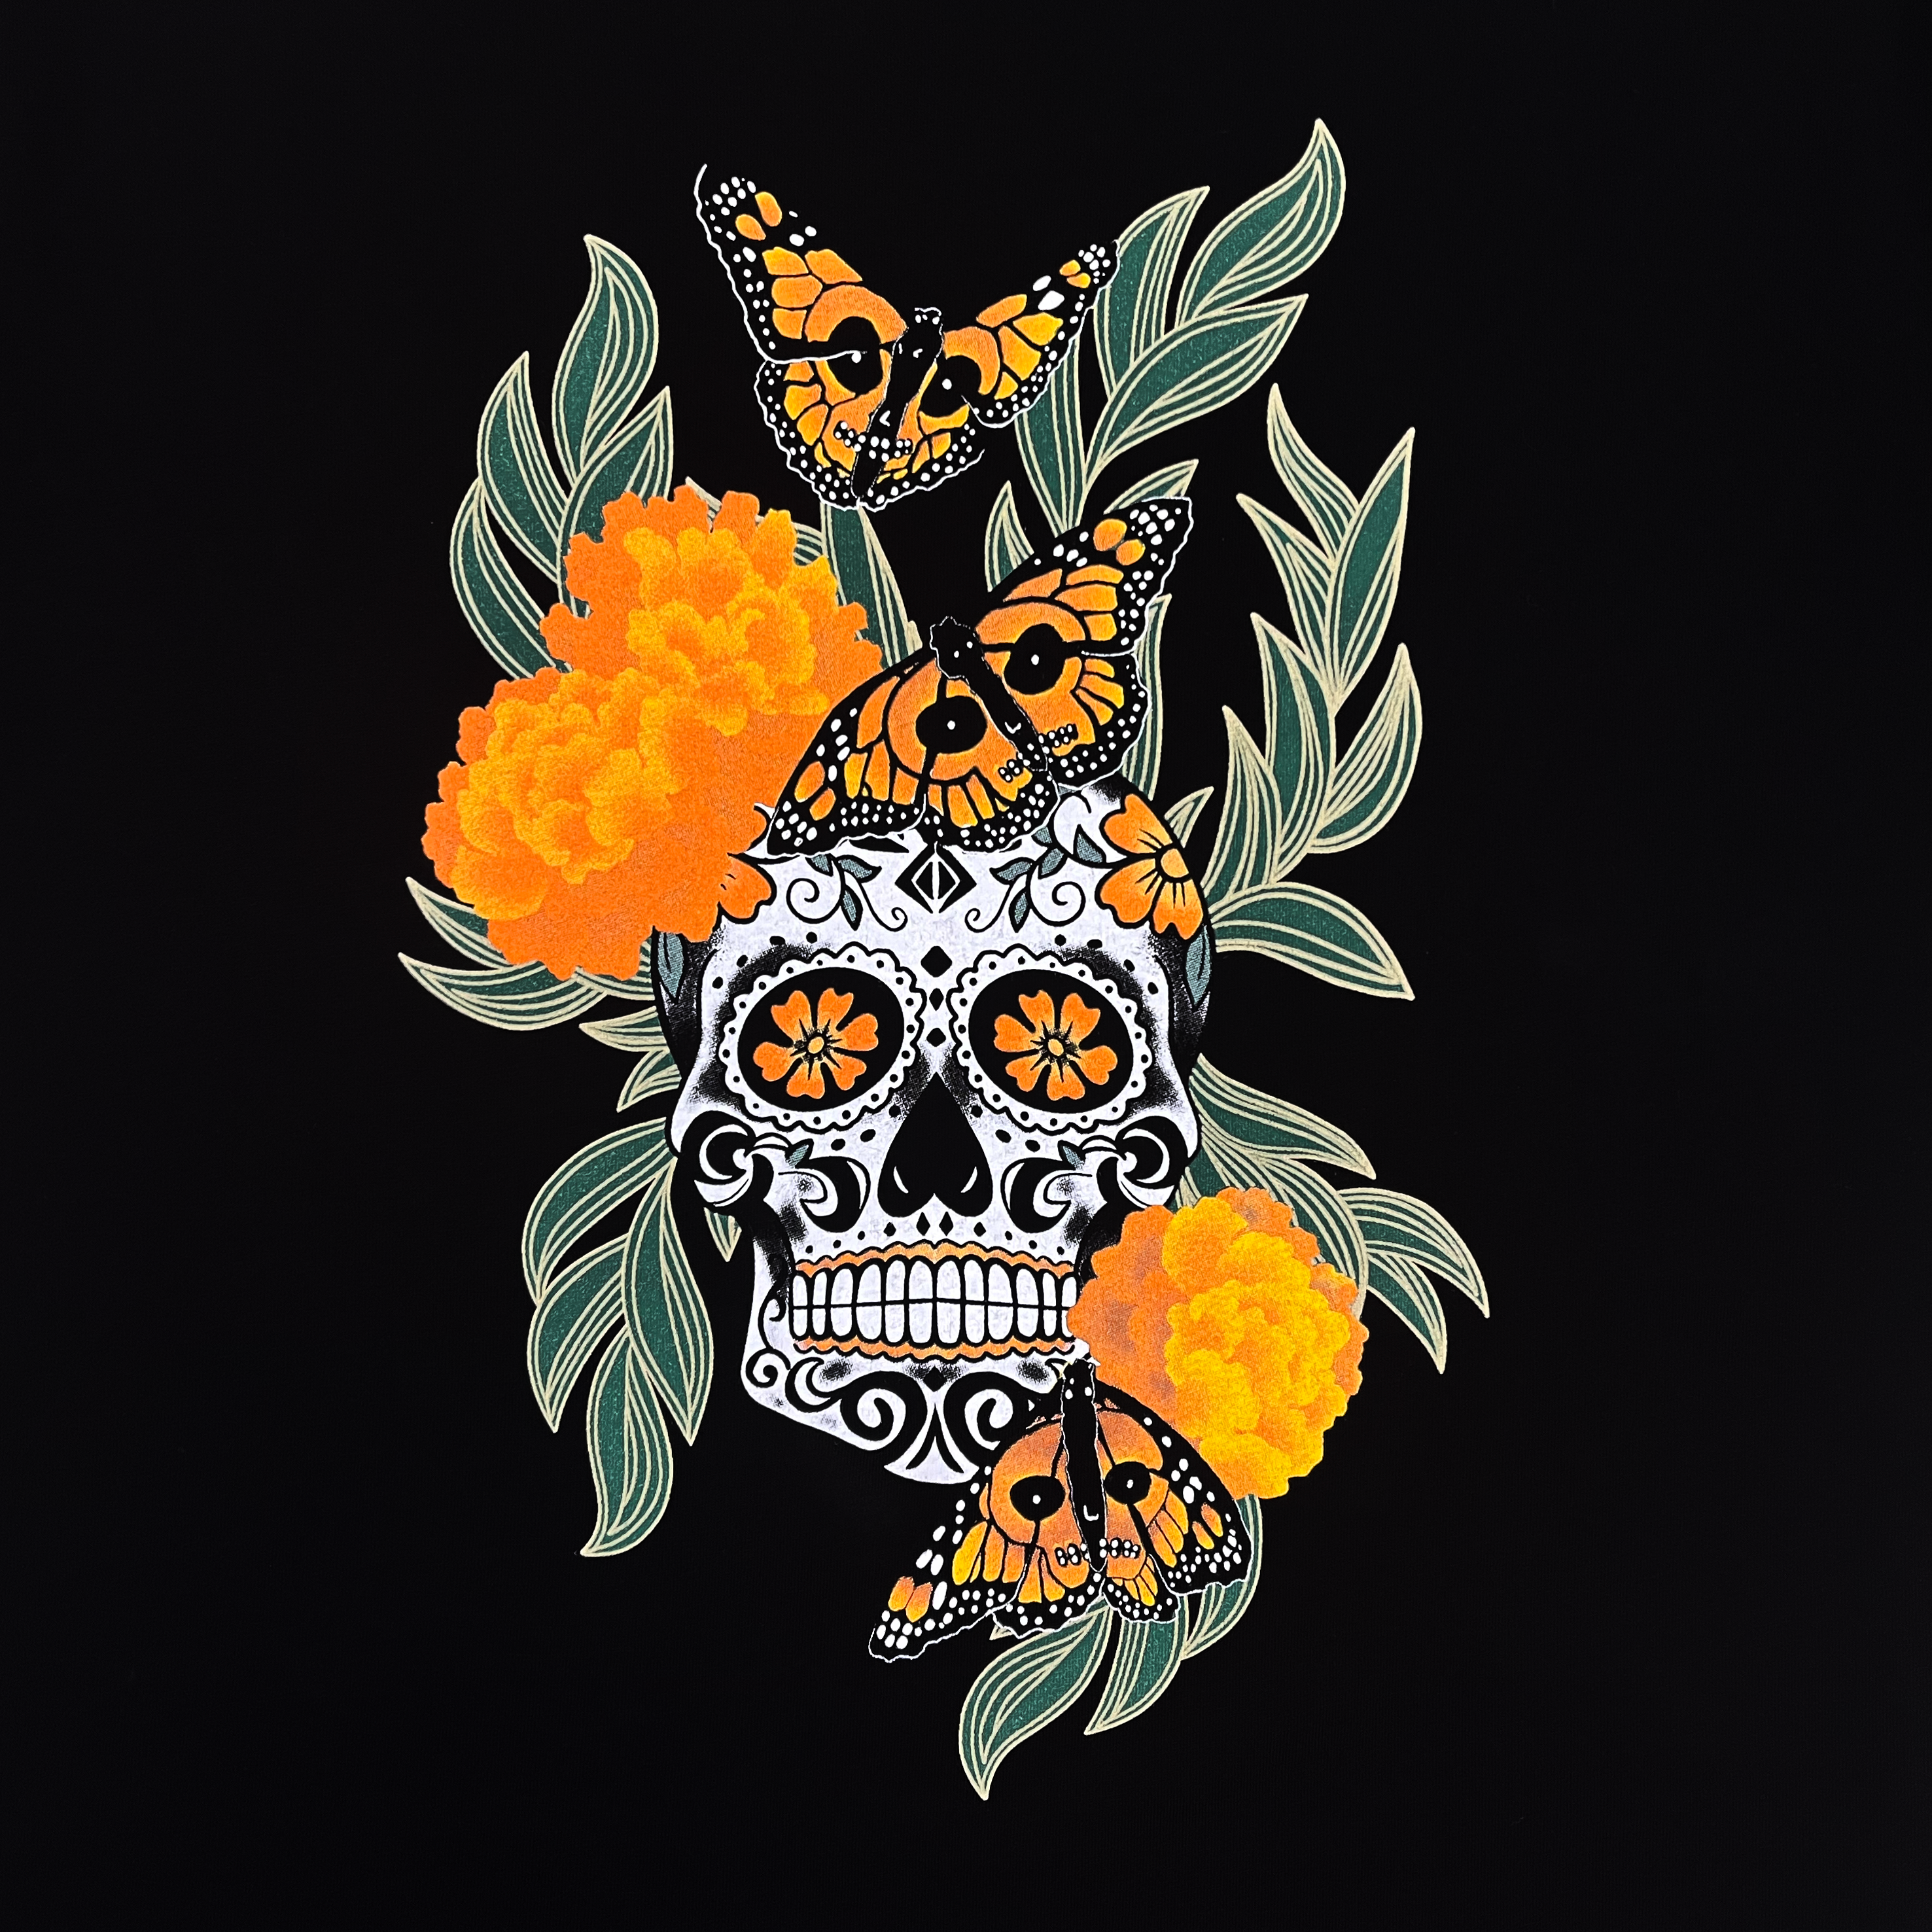 A close-up of Oakland artist Jet Martinez's graphic art depicts a sugar skull surrounded by Marigolds and Monarch butterflies on a black infant one-piece.